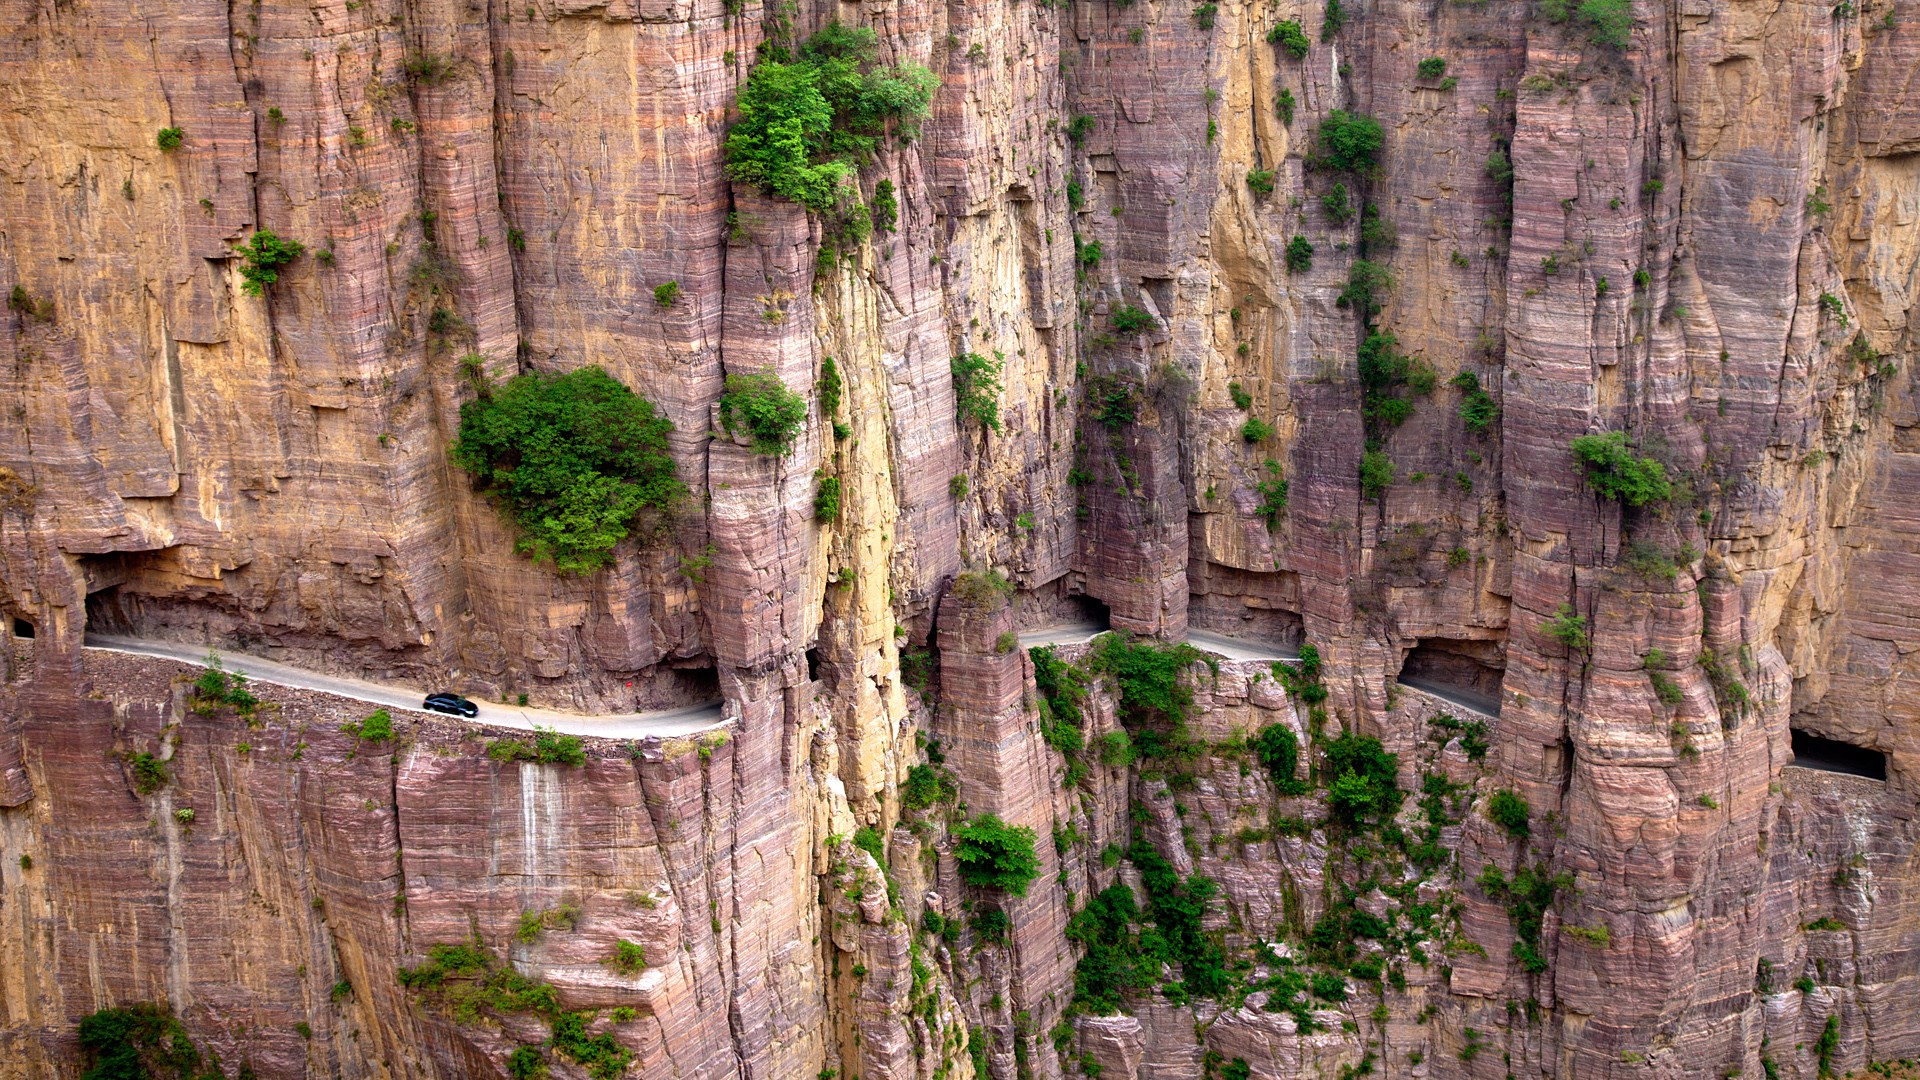 General 1920x1080 nature landscape mountains rocks trees plants Guoliang Tunnel China road